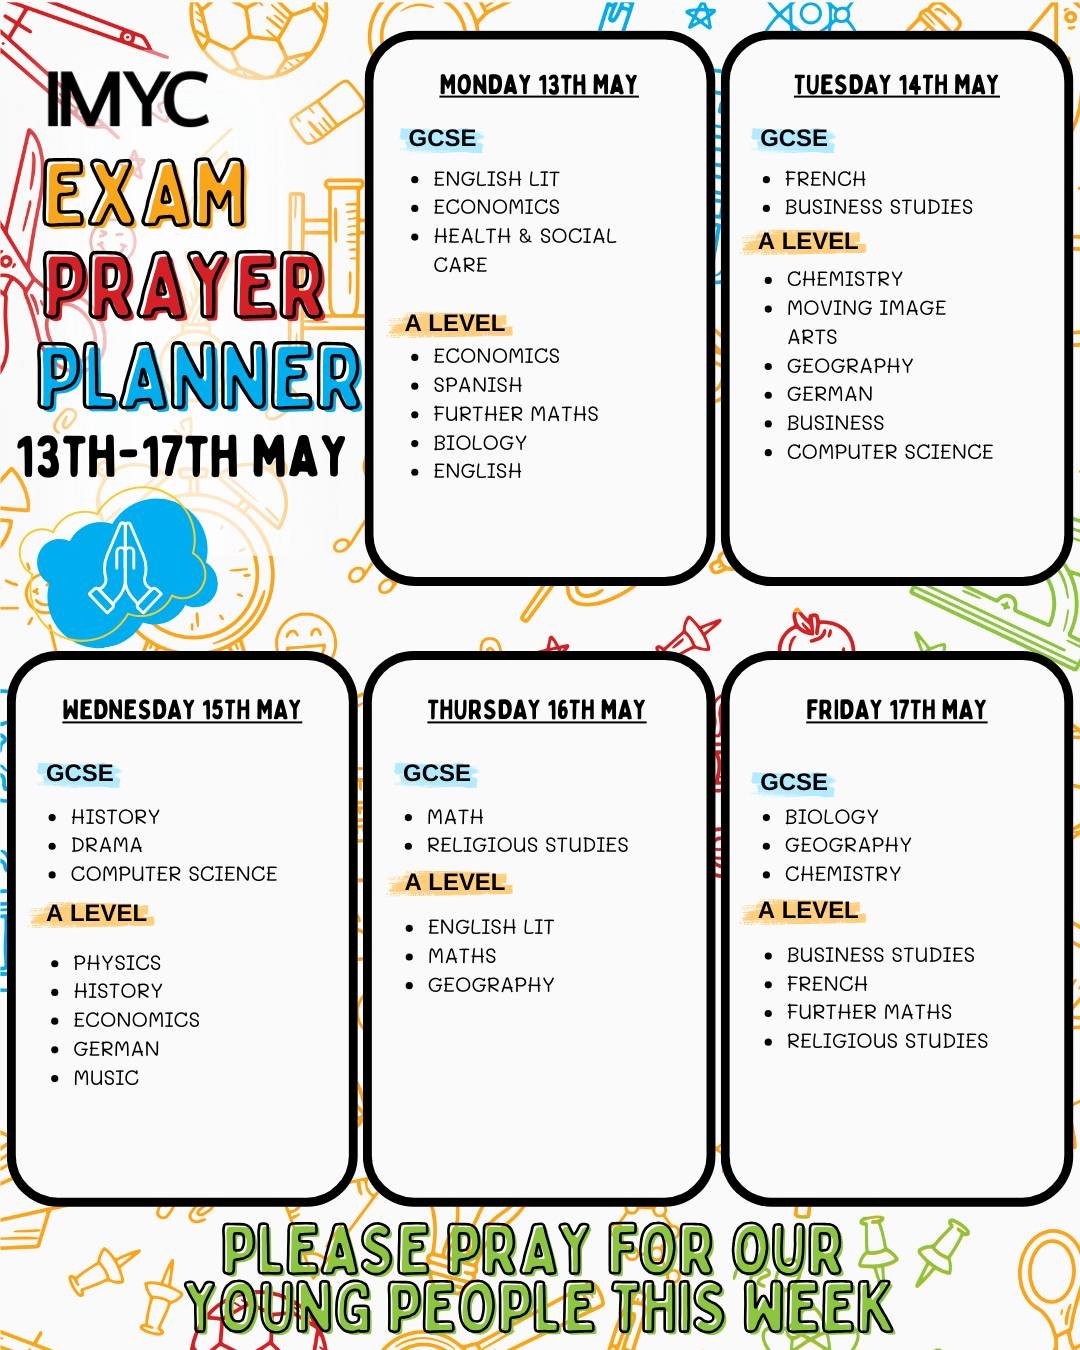 📝 WEEK 2 OF EXAMS 📝

This week is going to be another busy one for exams. 
We're praying for you as you enter this week! 🙌🙏